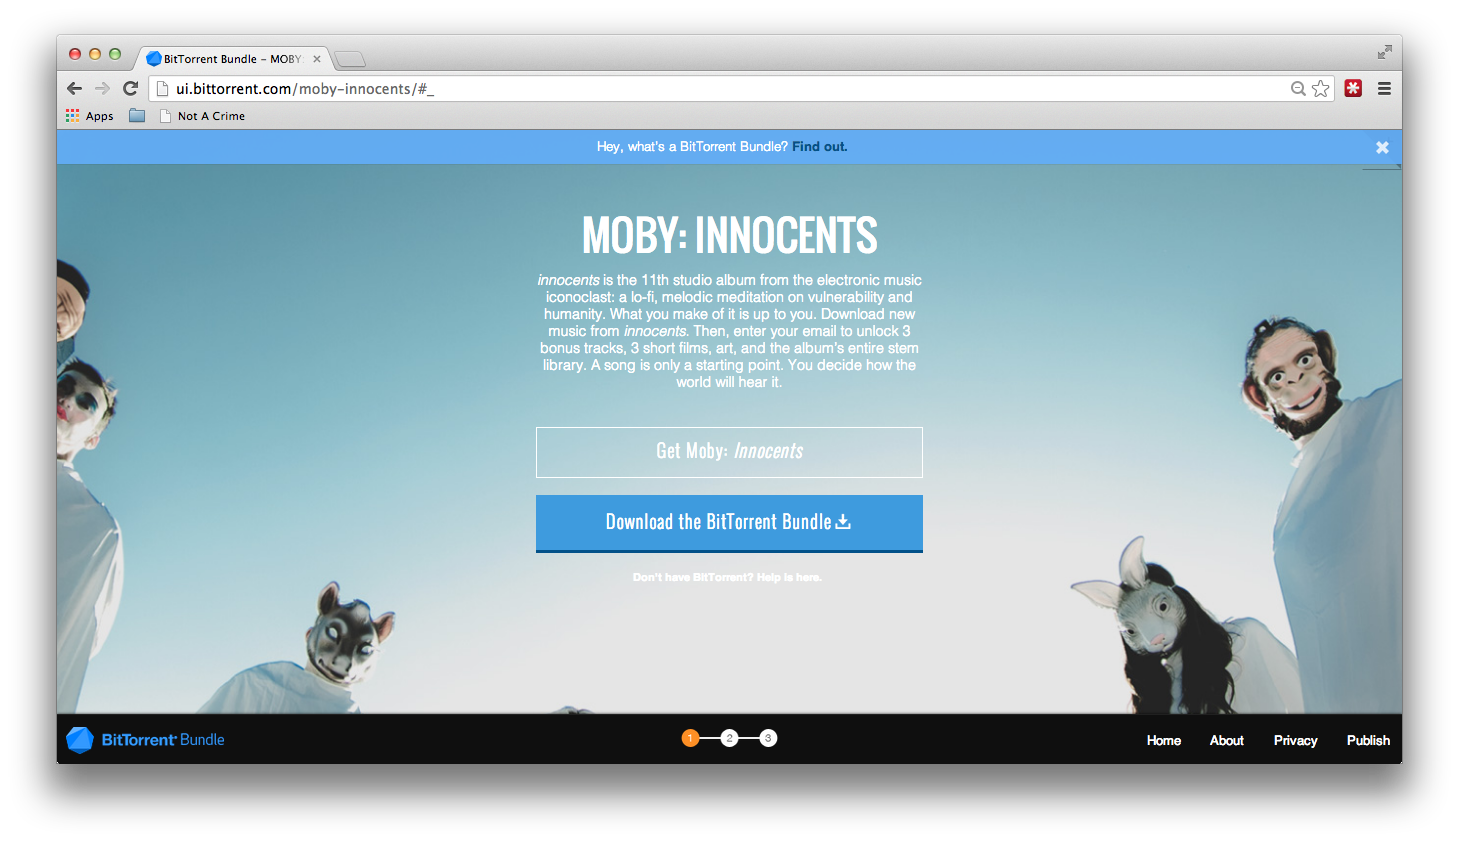 Get Moby Innocents